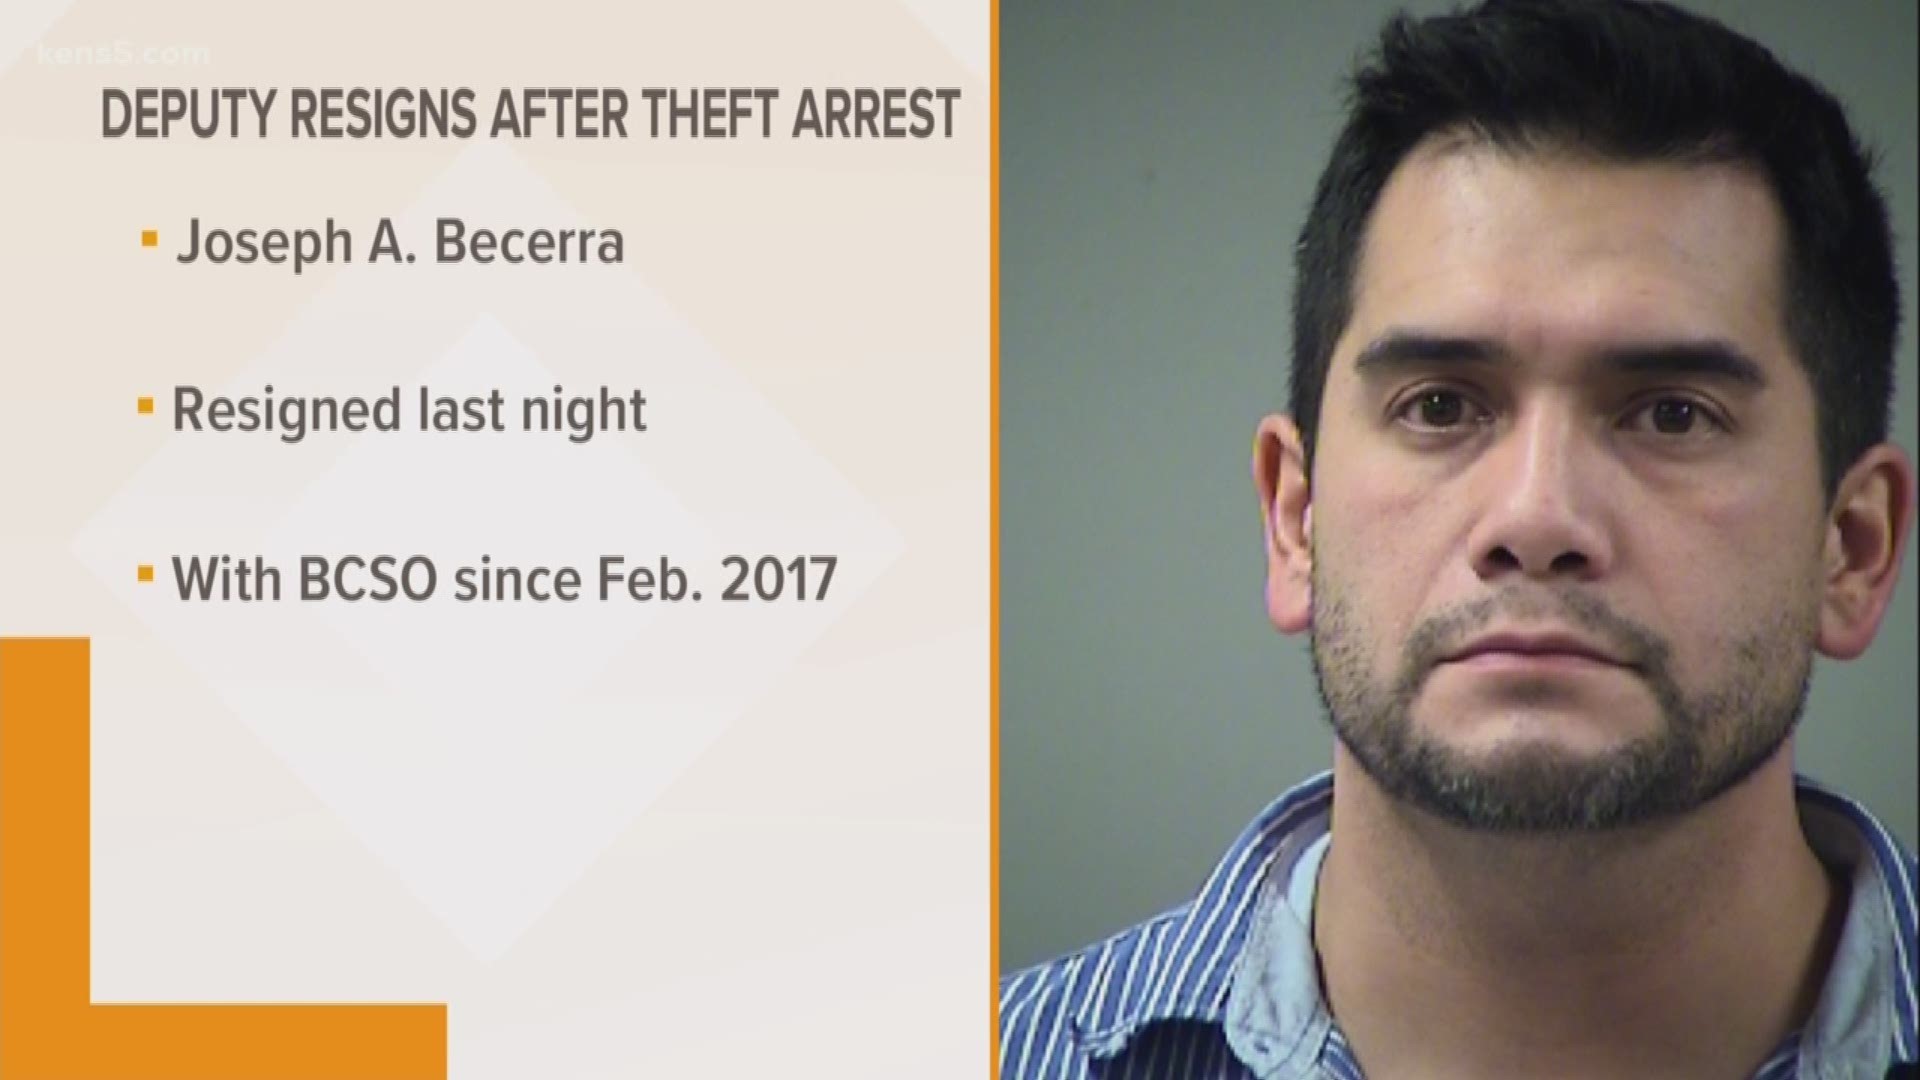 A Bexar County Sheriff's Office detention deputy resigned after he was arrested for theft on Monday evening, according to BCSO.